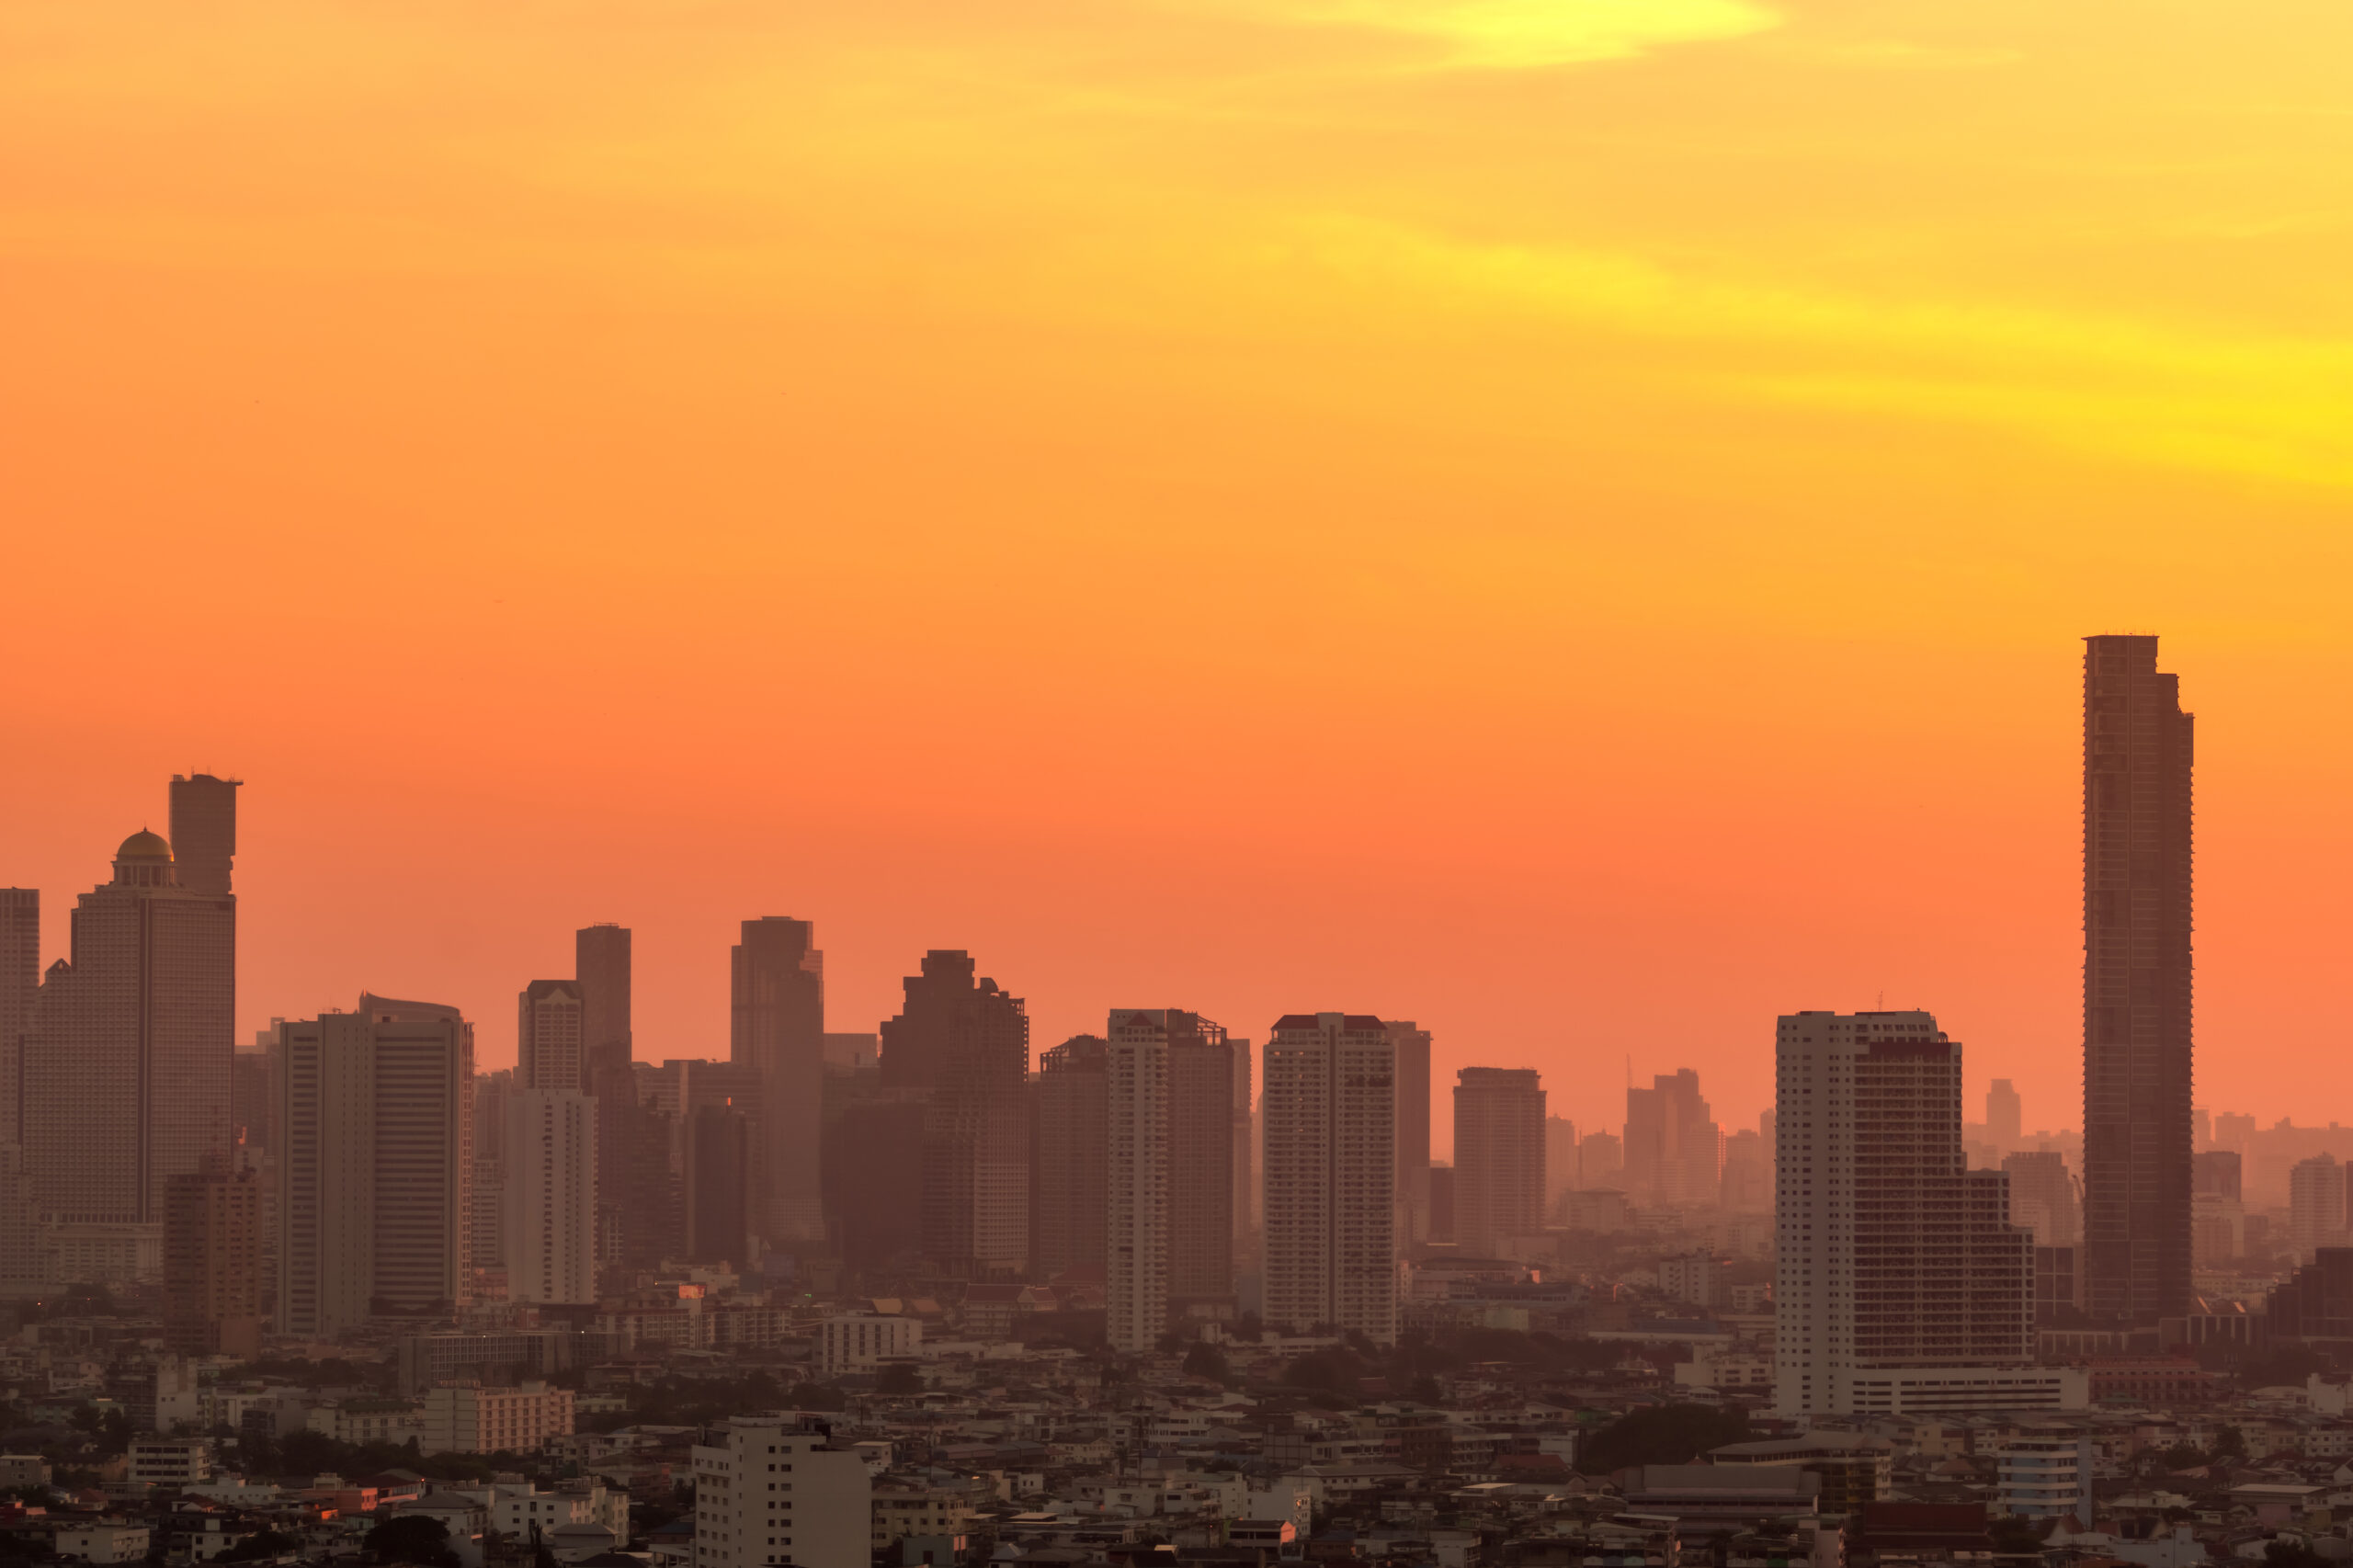 A city scape of small and tall buildings is shrouded in a cloak of smog at sunset. The color of the smog is deep orange on the lower left to yellow in the upper right.